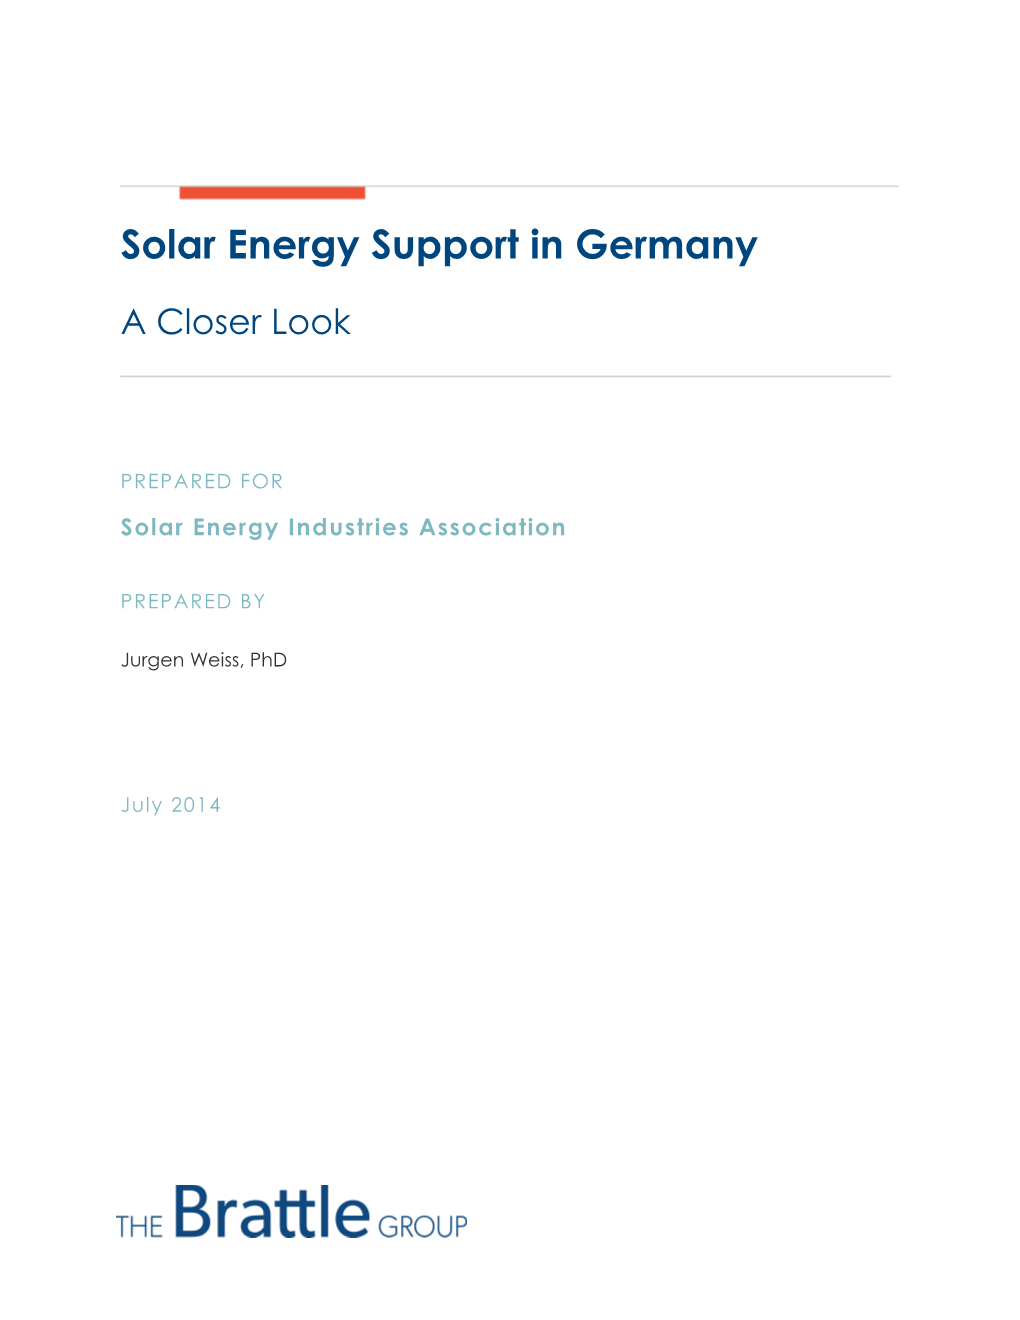 Solar Energy Support in Germany: a Closer Look